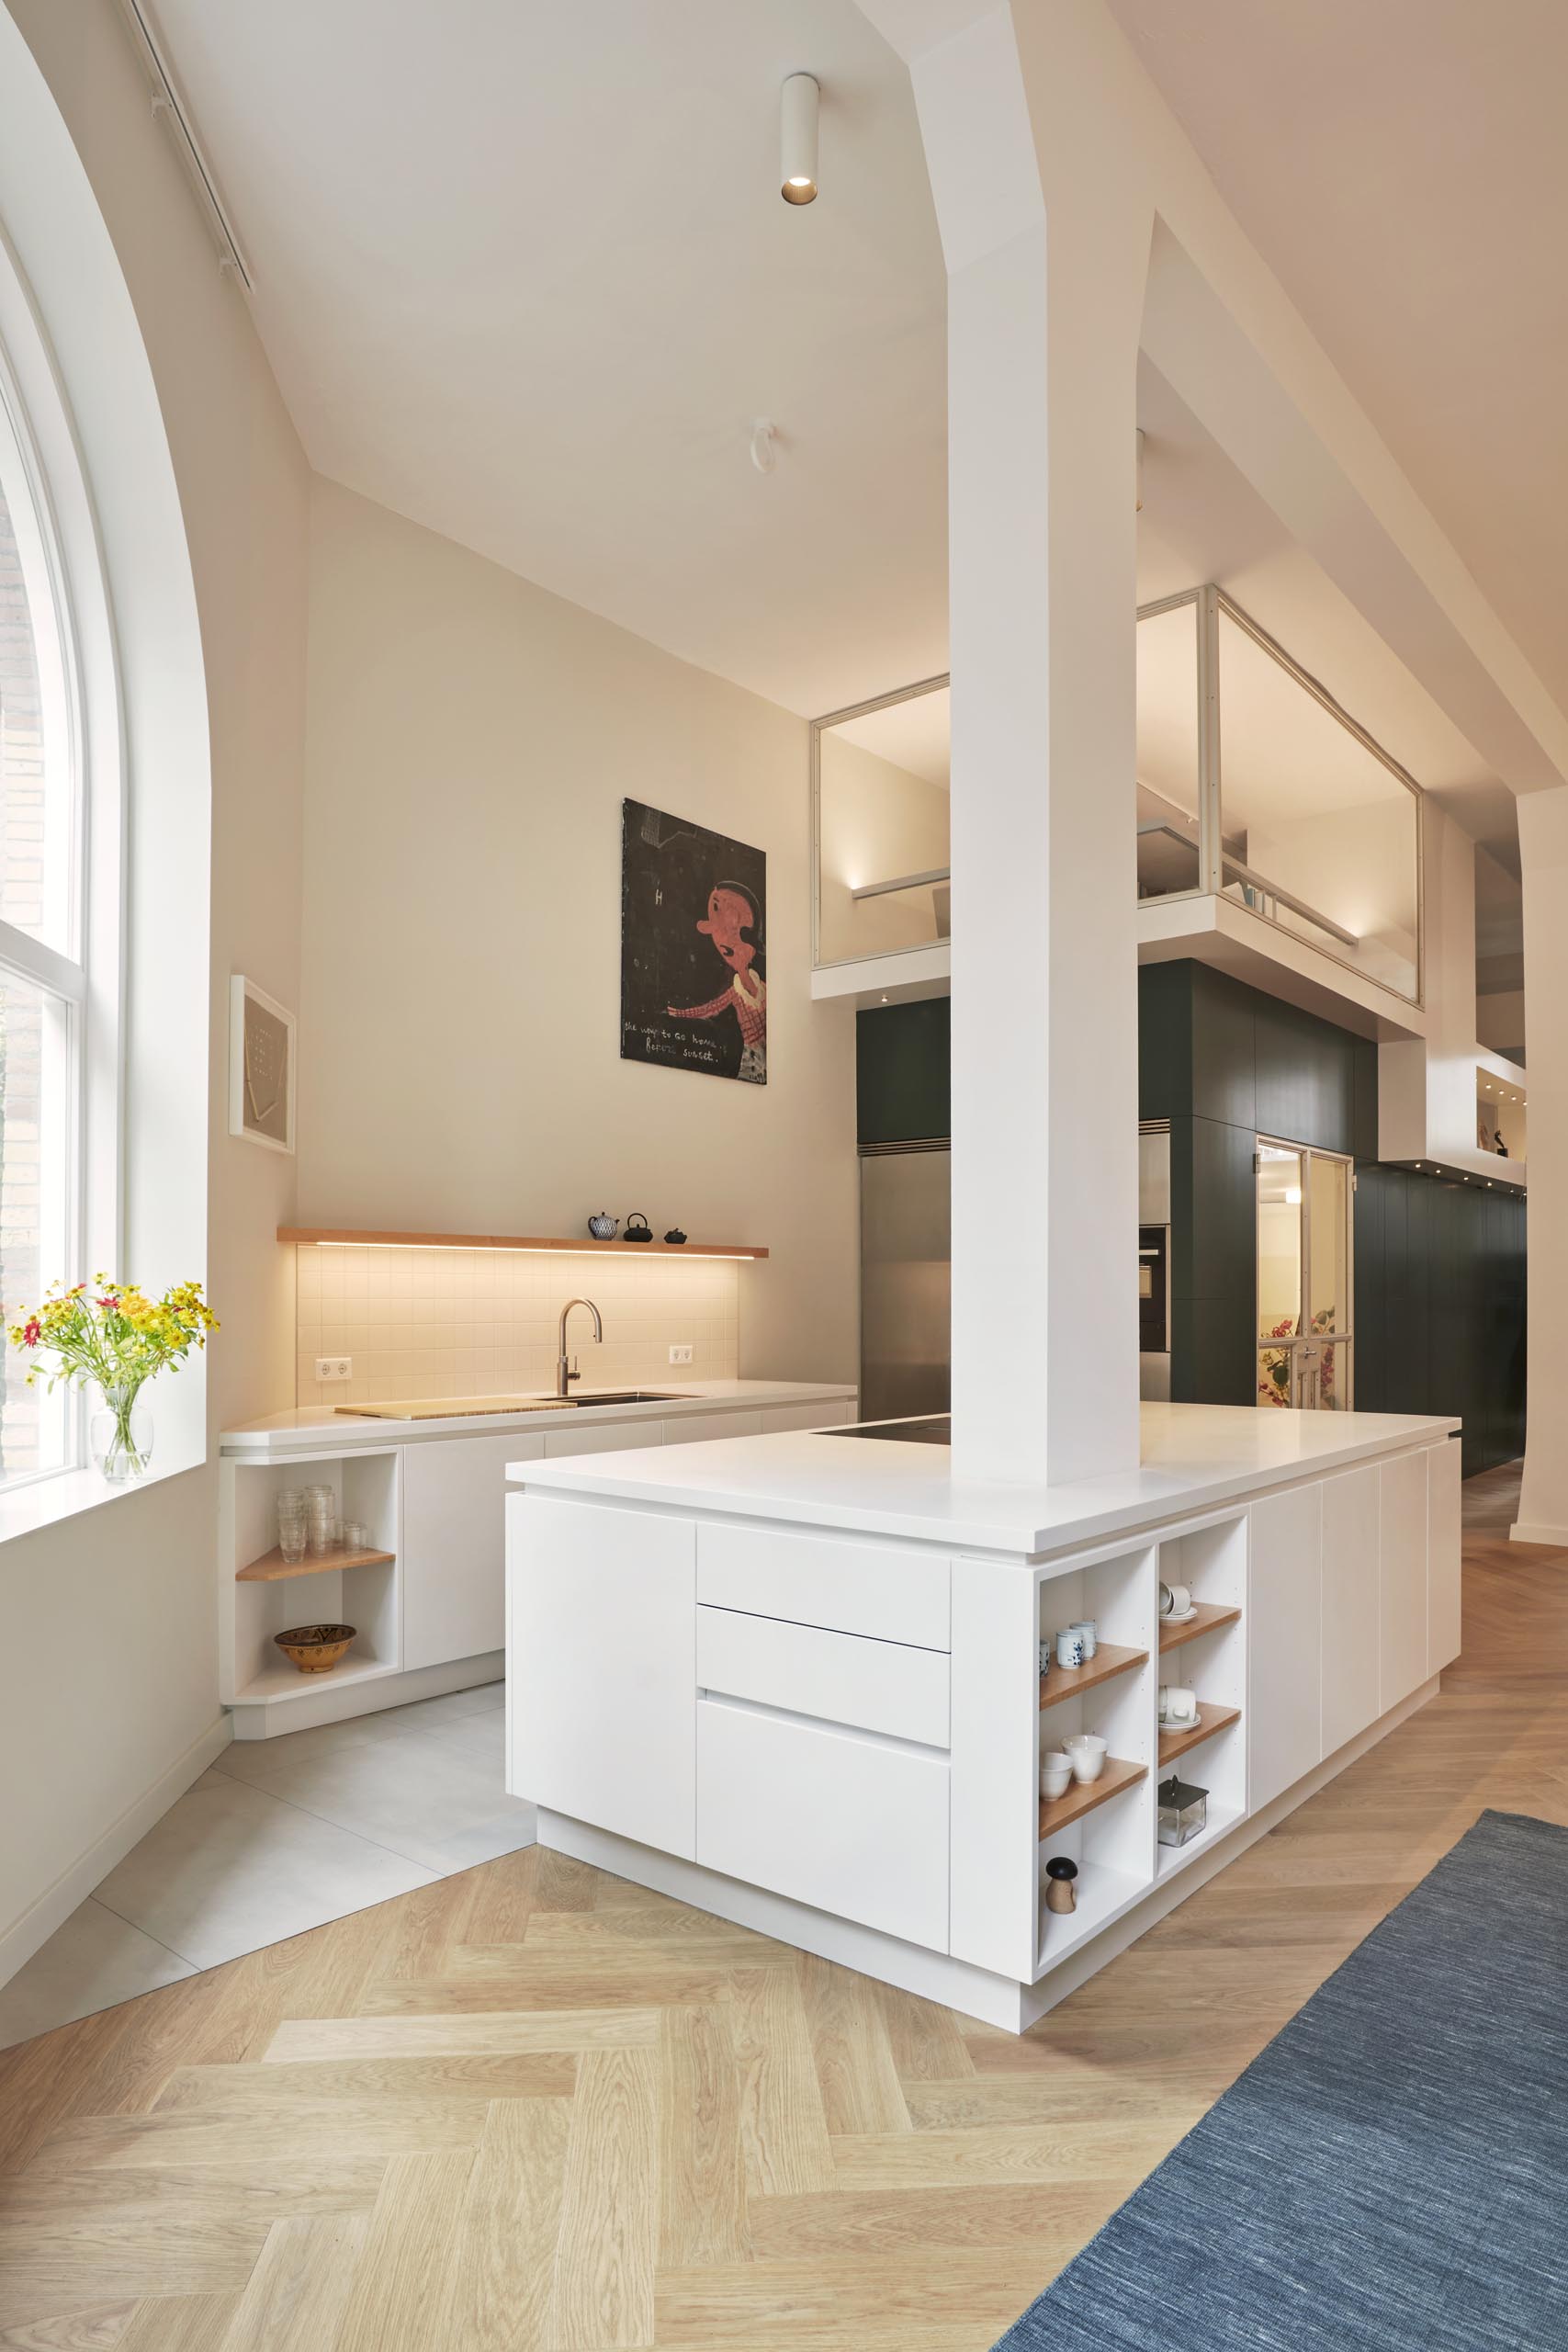 A modern white kitchen with a large island that wraps around a column, and includes both drawers and open shelving.